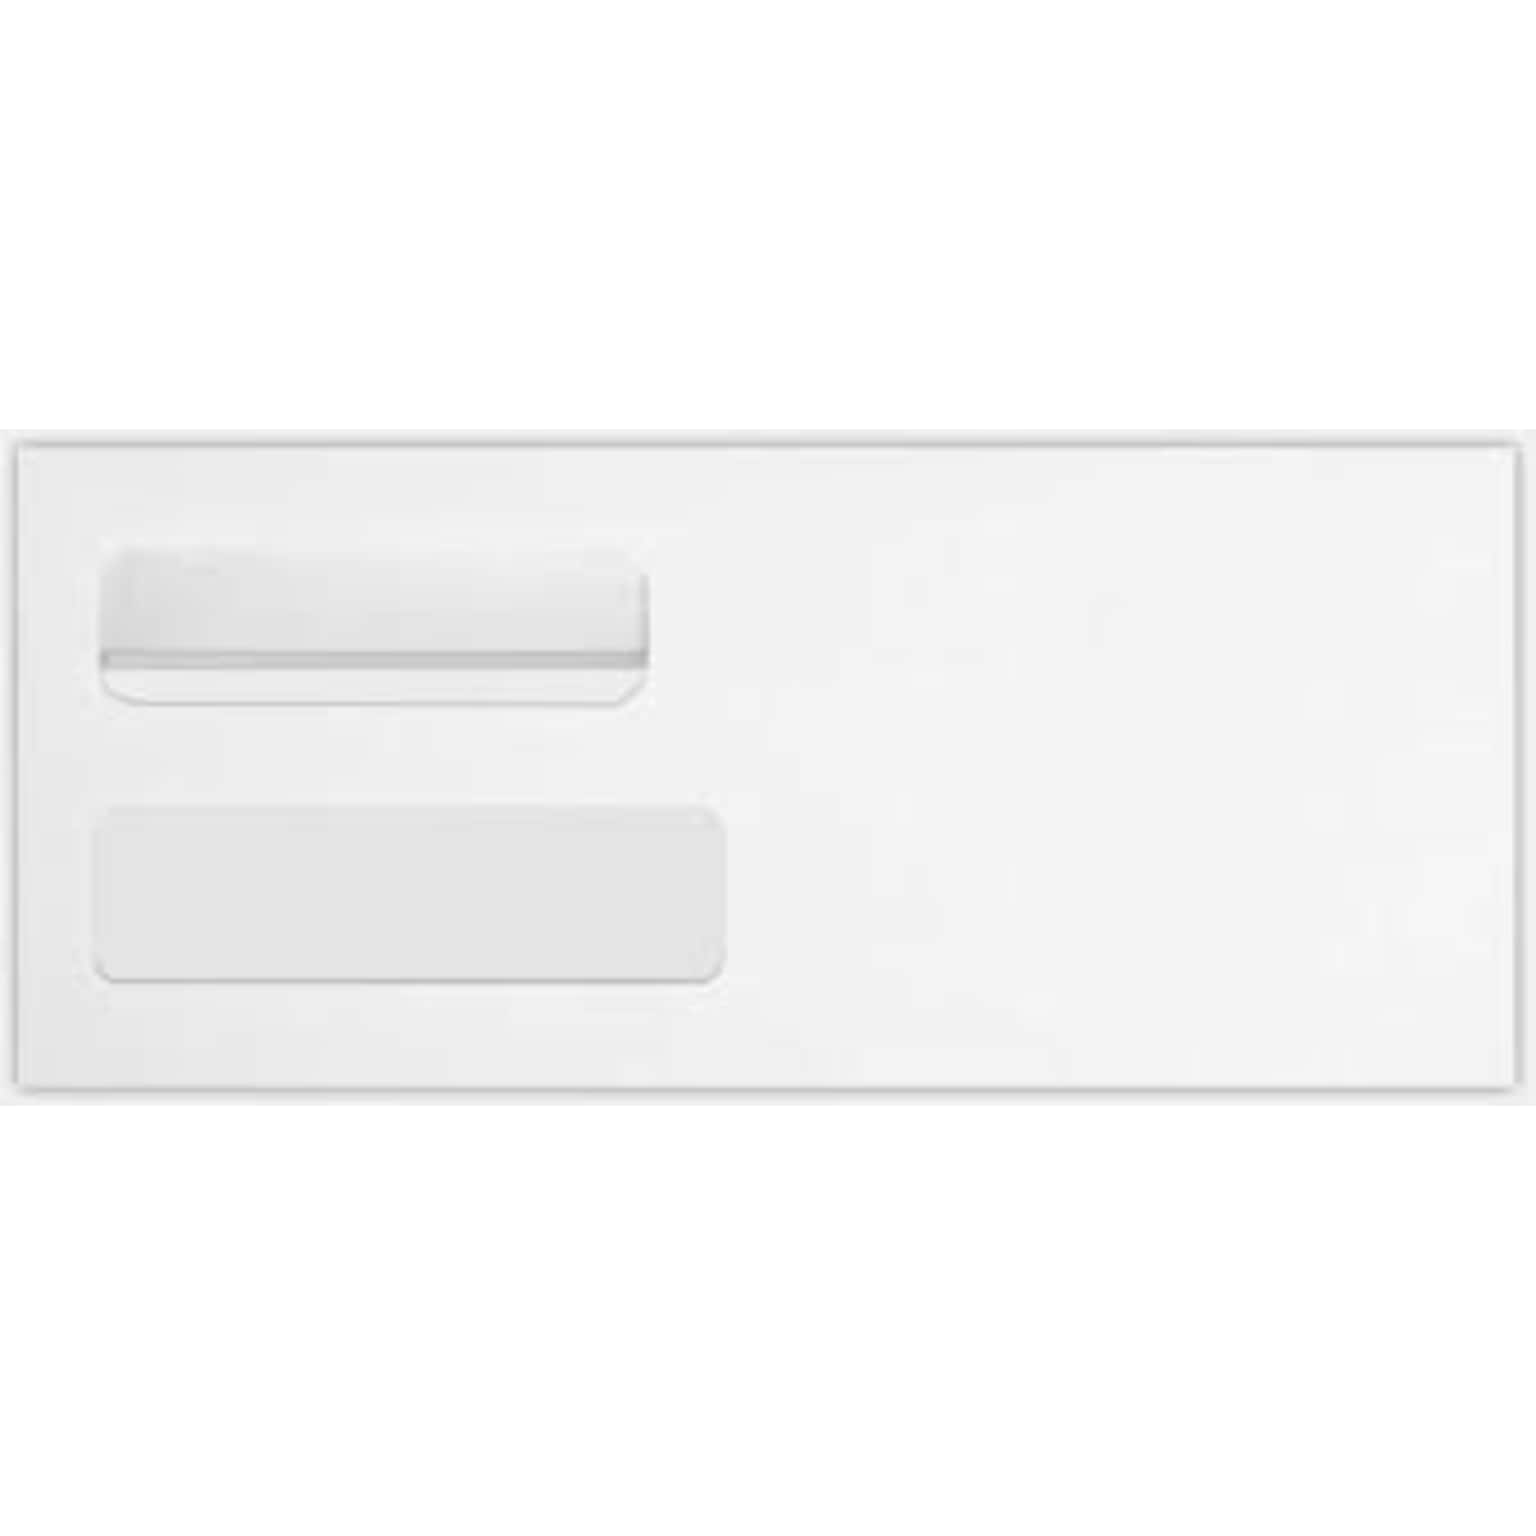 Quality Park Redi-Seal Self Seal #10 Double Window Envelope, 4 1/2 x 9 1/2, White Wove, 500/Pack (24559-QP-500)